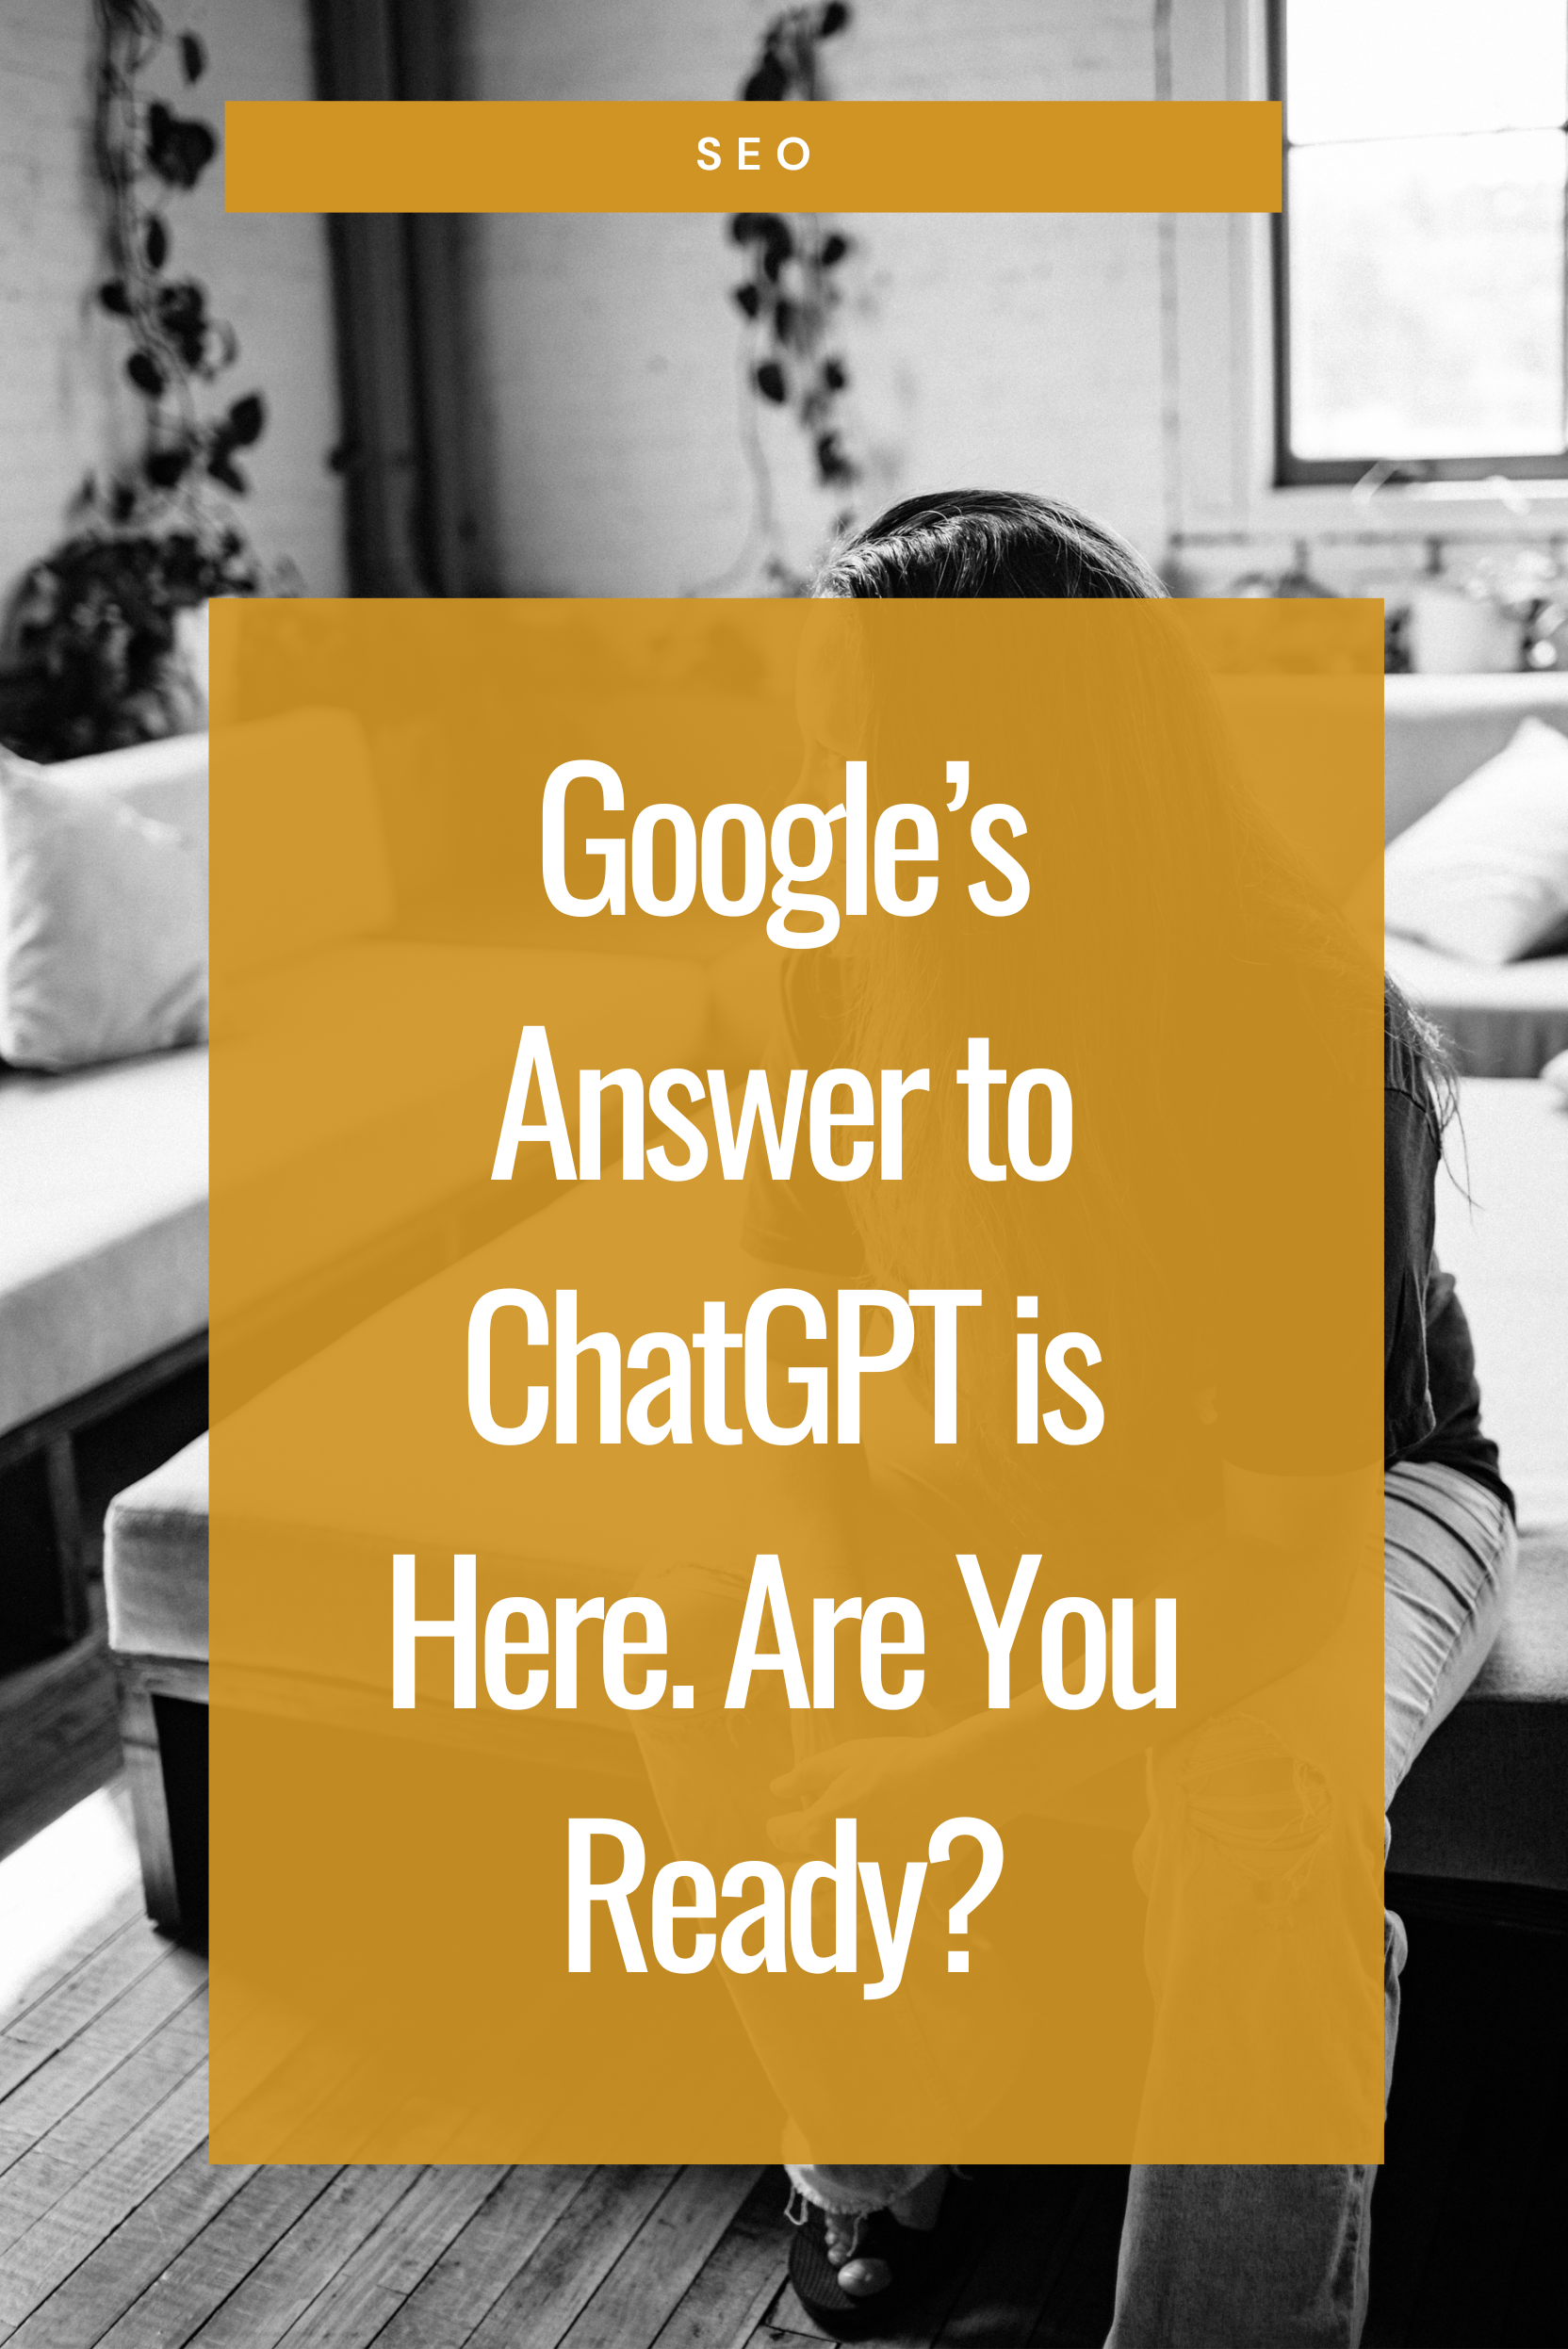 Google's Answer to ChatGPT is SGE